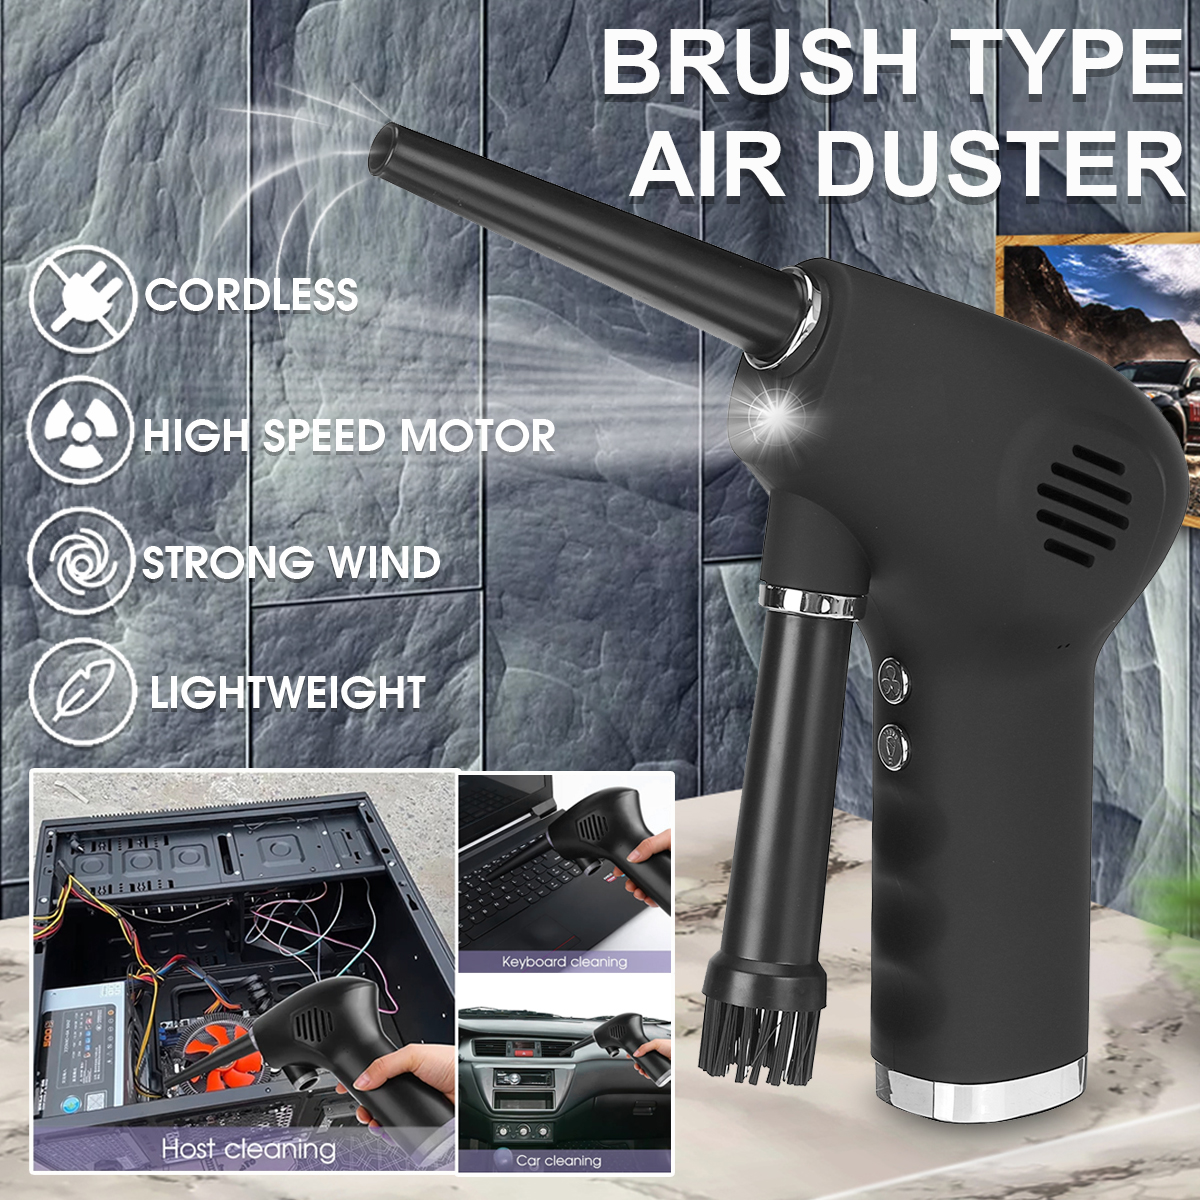 70ms-Cordless-Air-Duster-For-Computer-Cleaning-Replaces-Compressed-Spray-Gas-Cans-Rechargeable-Clean-1900743-2